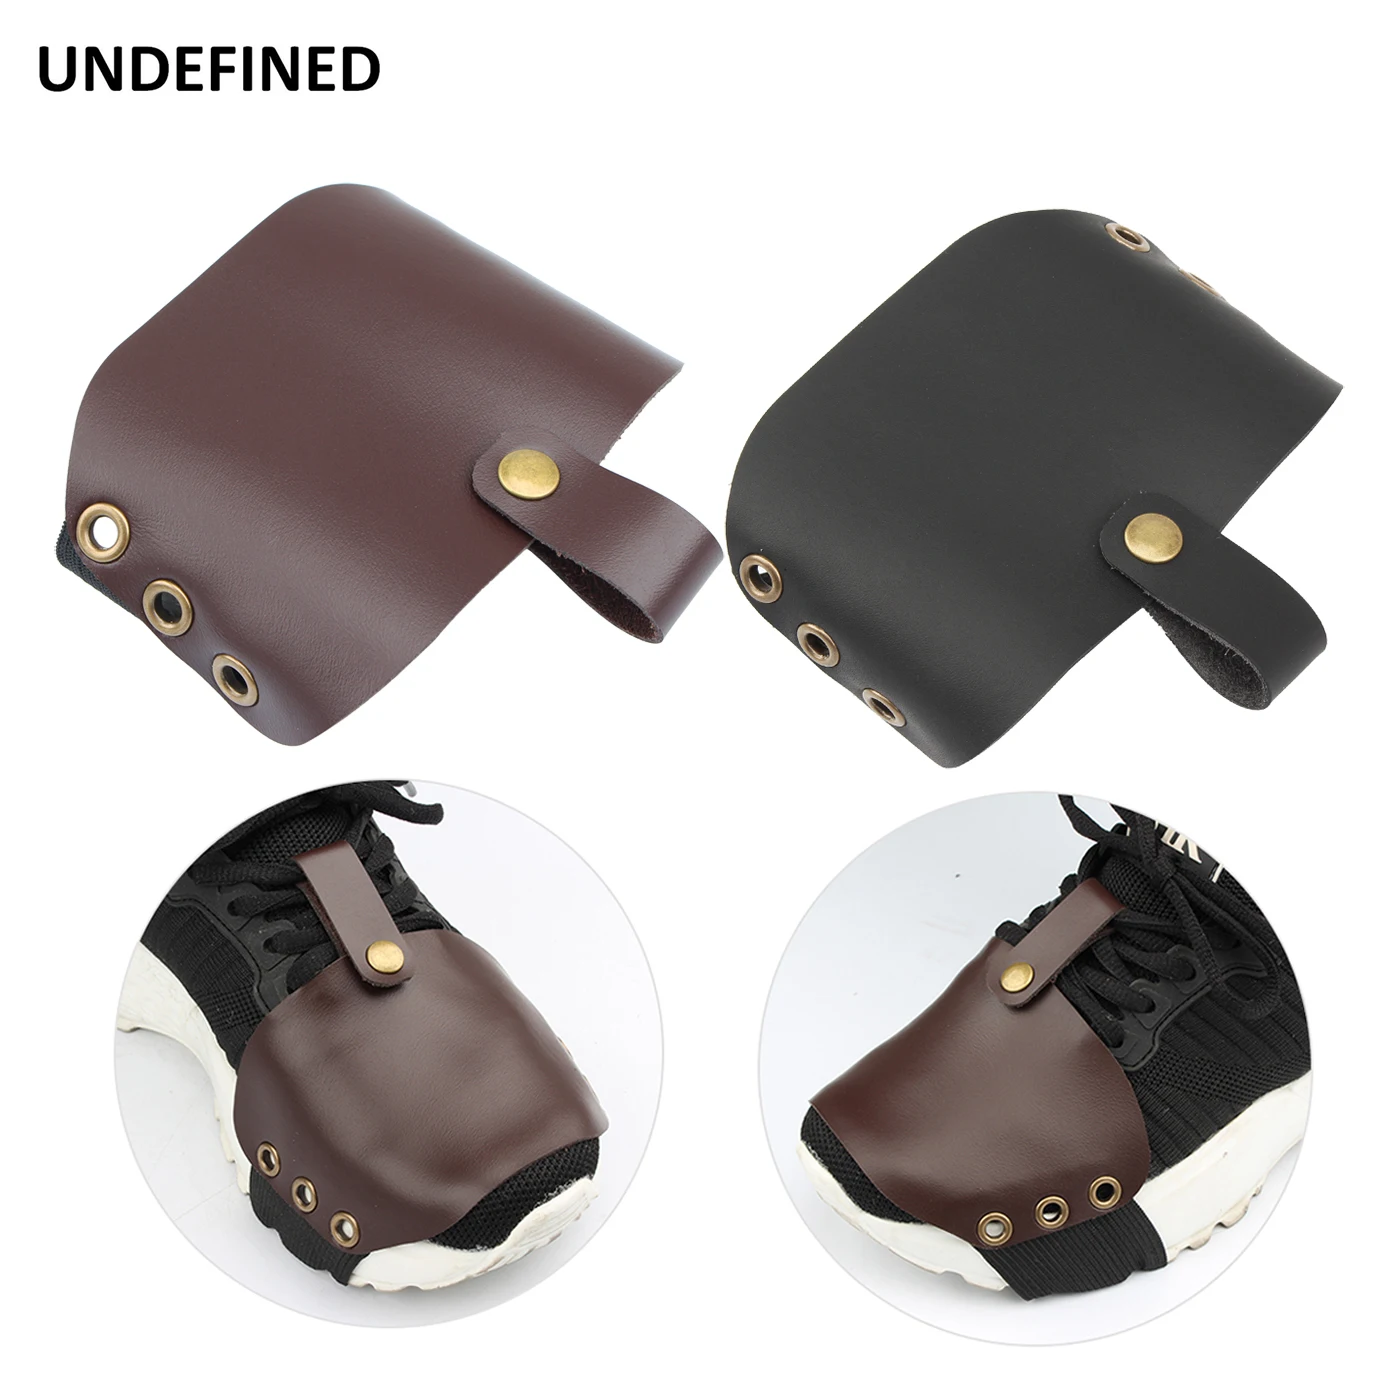 

Motorcycle Shoes Protective Gear Shift Pad Leather Anti-skid Sock Boot Cover Shifter Guards for Motocross Racing Bike Universal